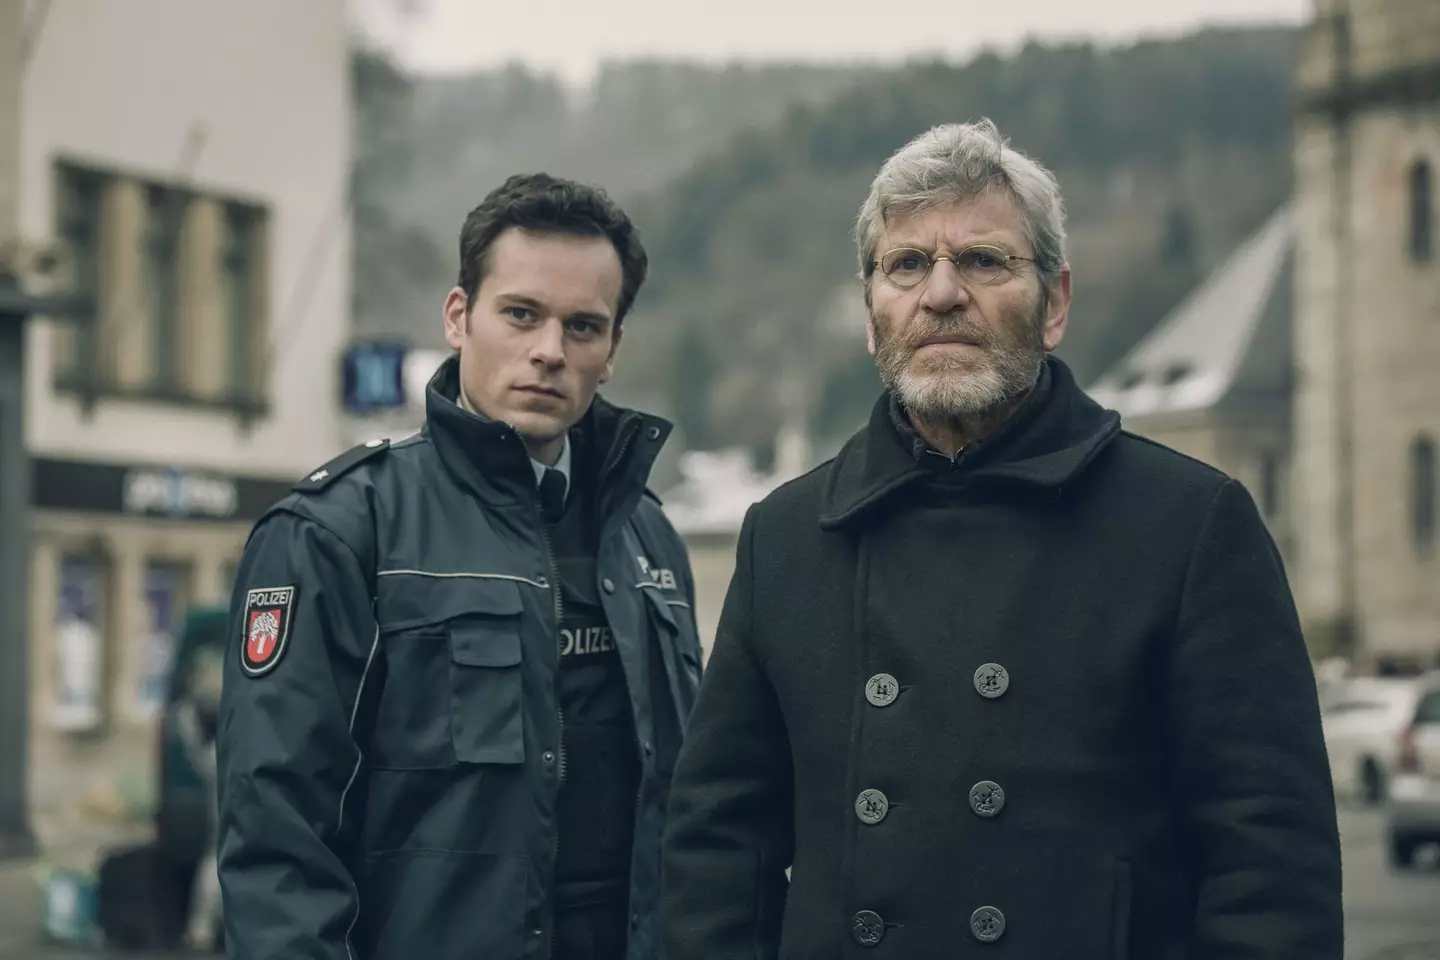 The tense crime drama is being removed from Netflix.